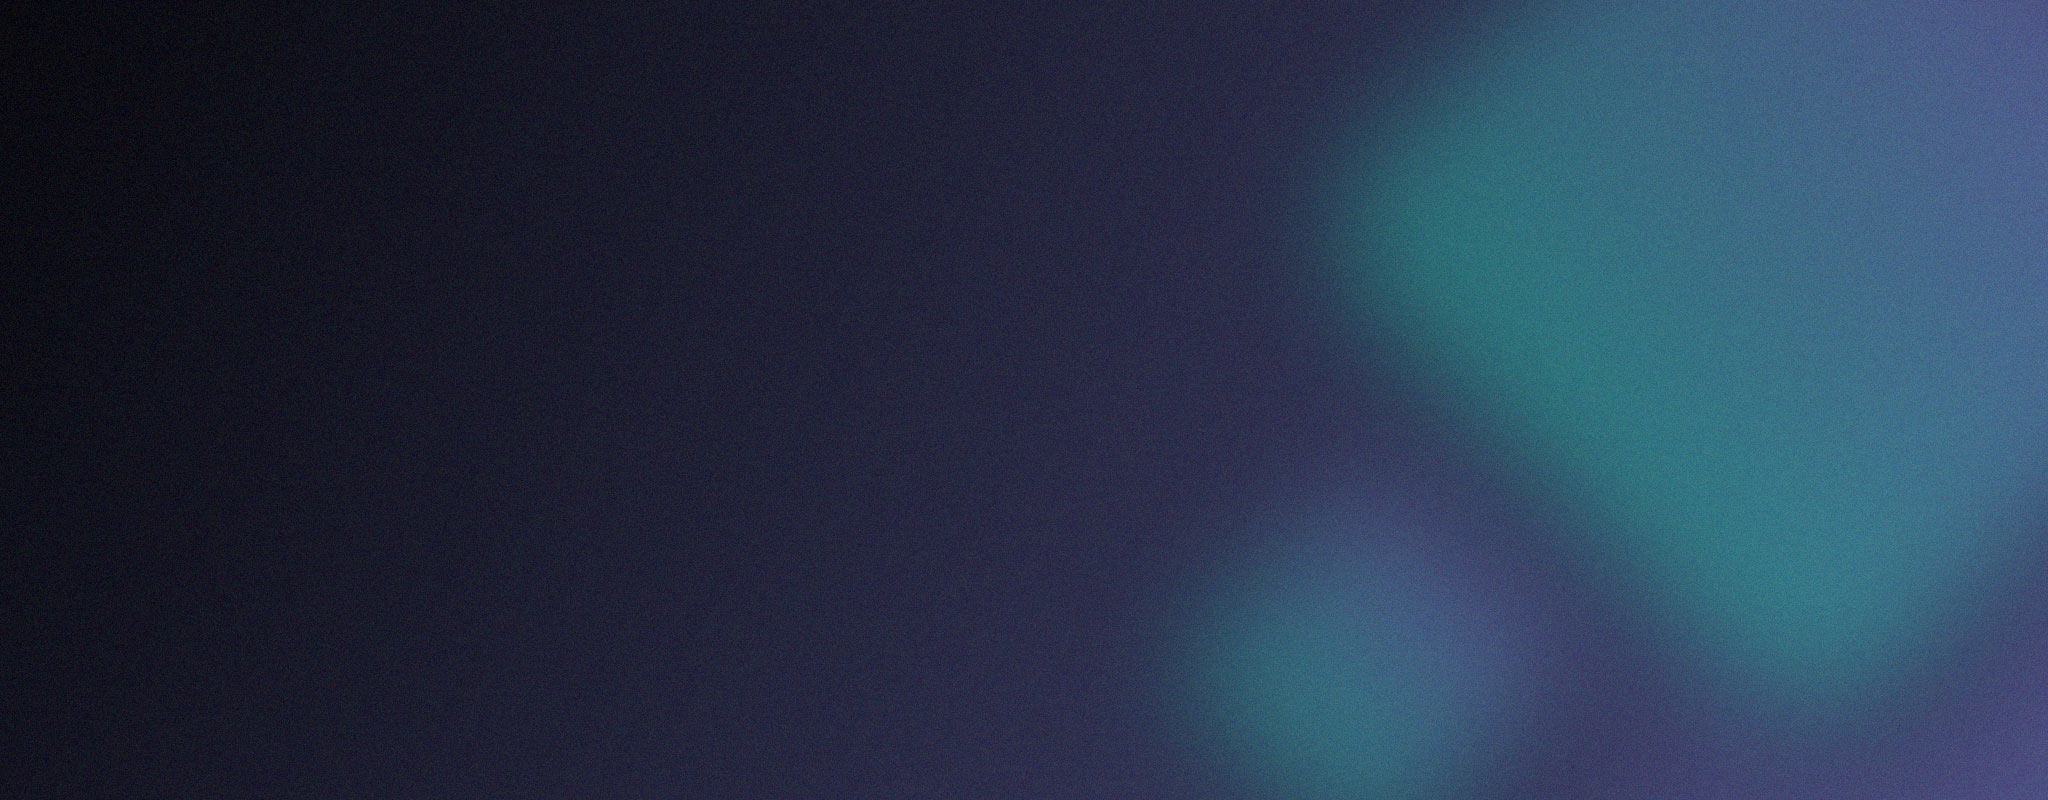 Abstract image featuring a dark, gradient background with teal and light blue blurred shapes on the right side.